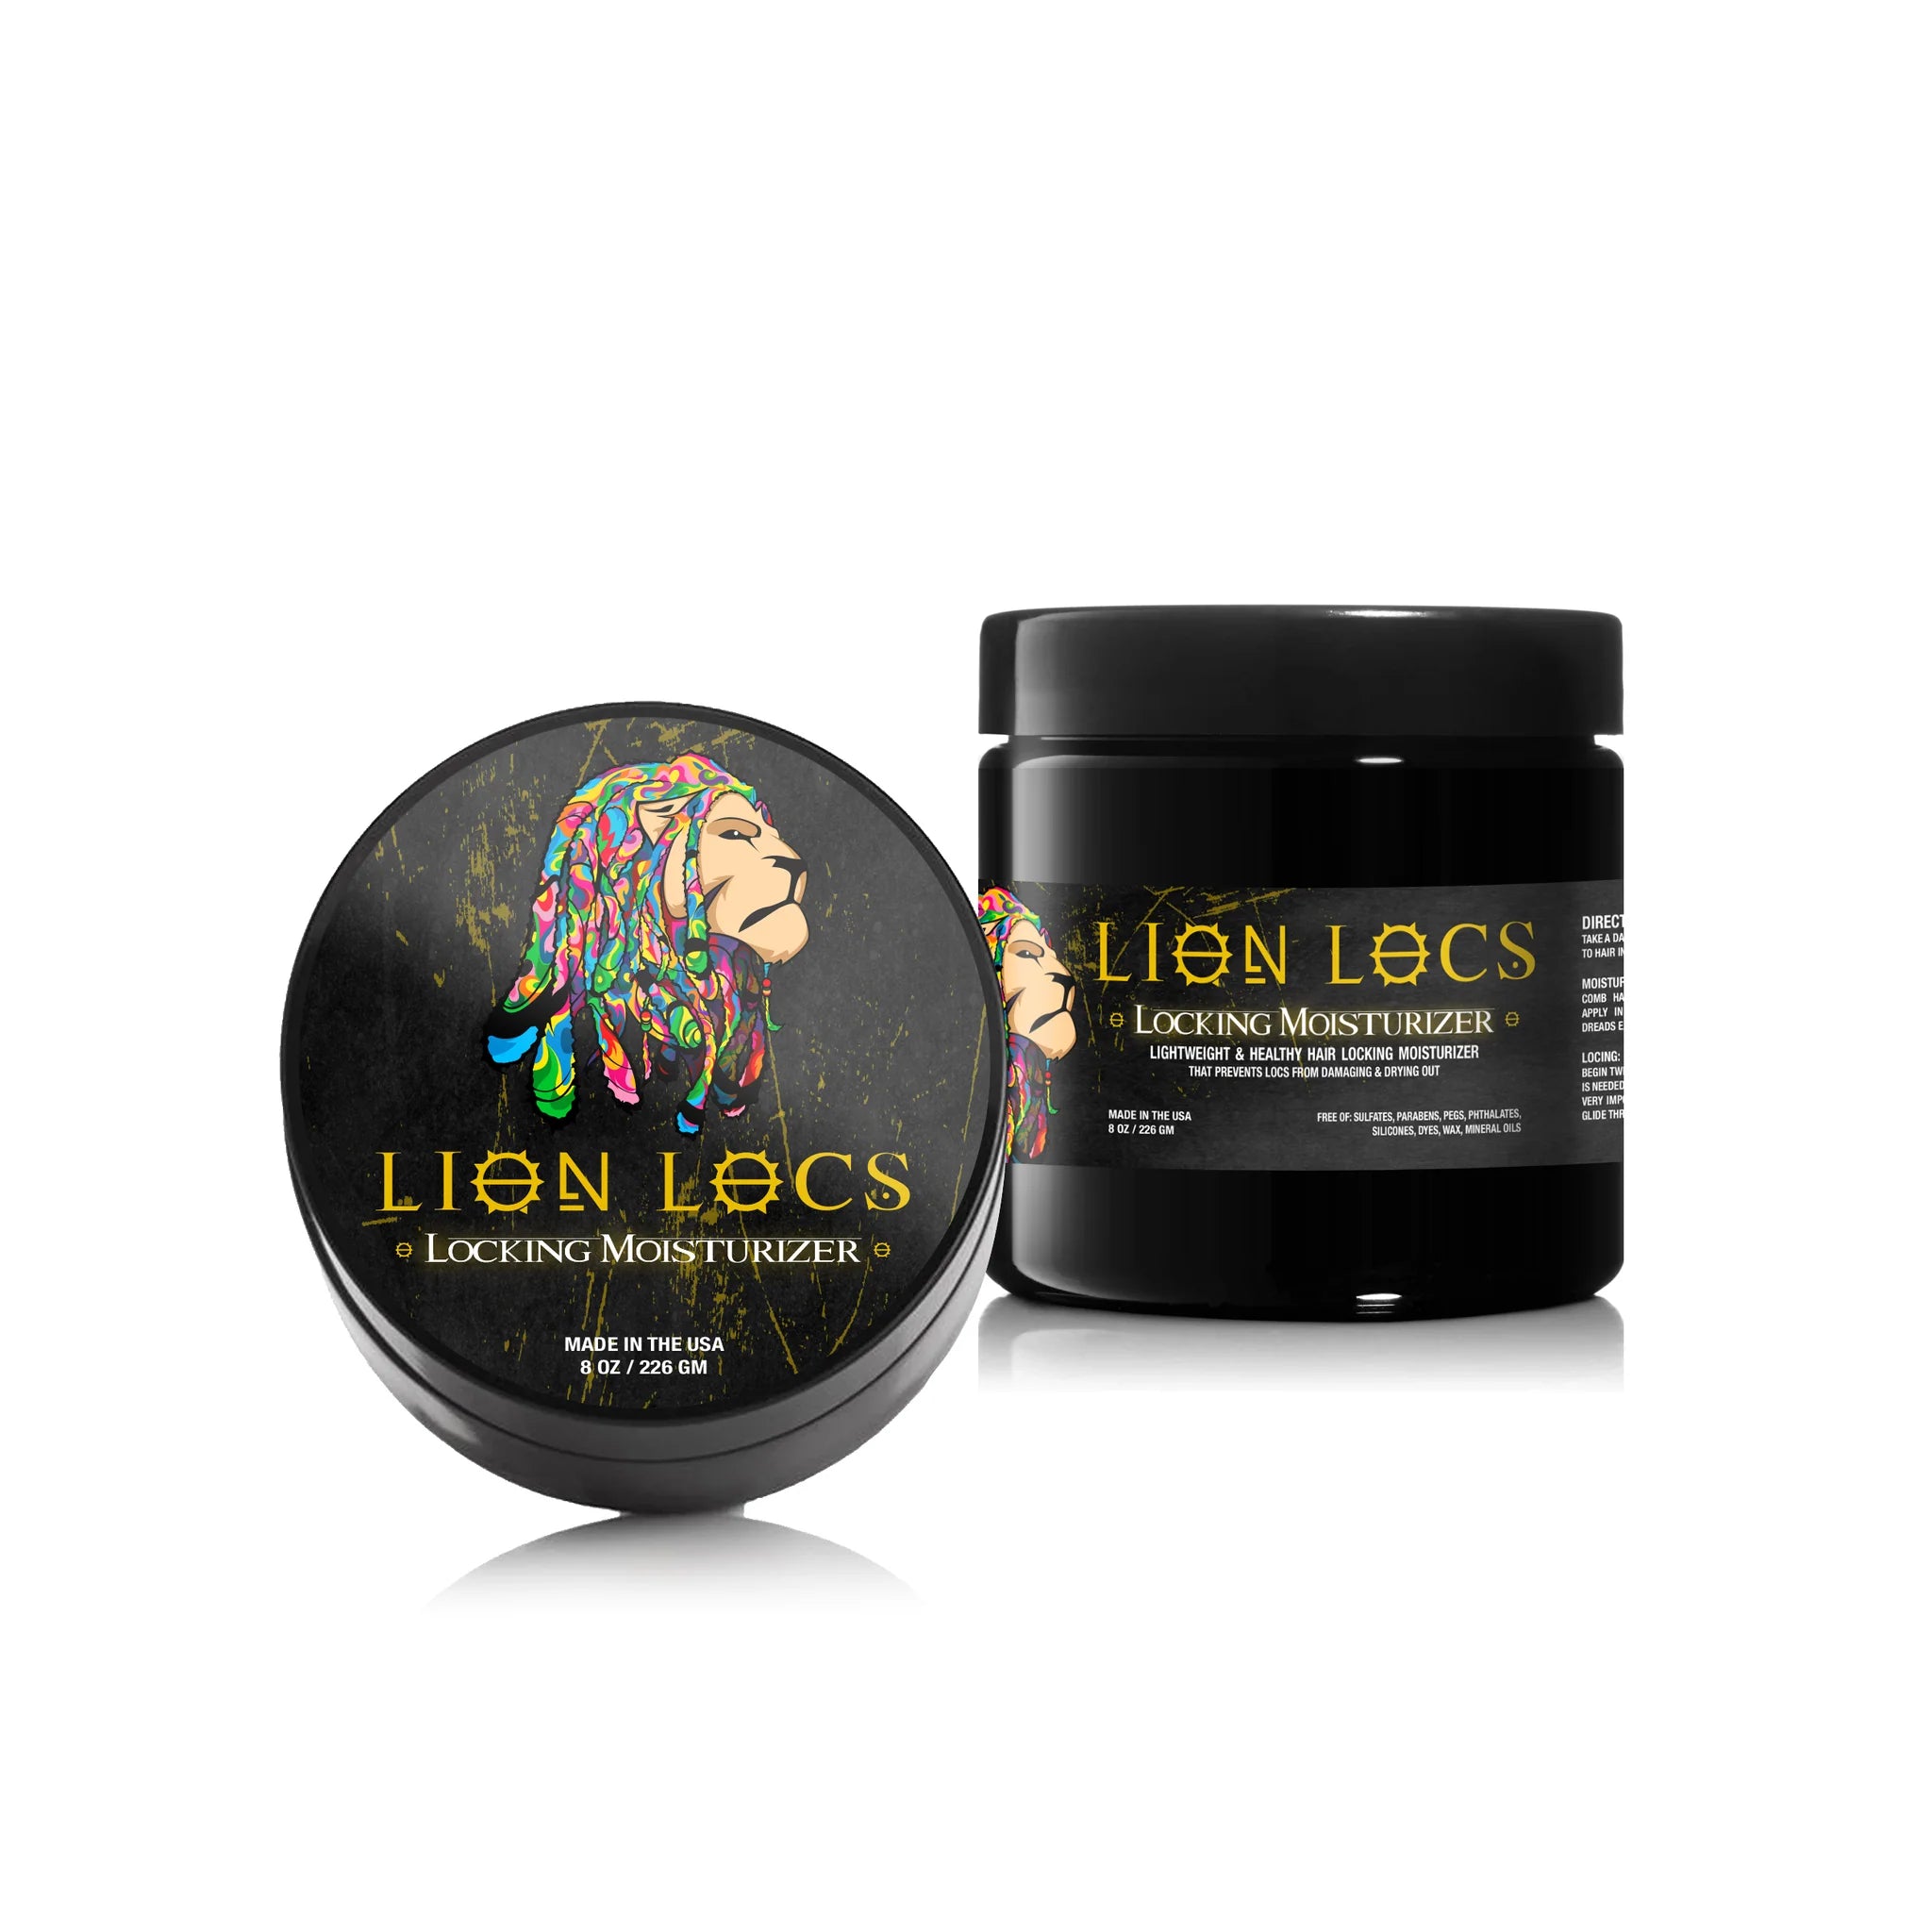 Do Lion Locs Products Work On All Hair Types?